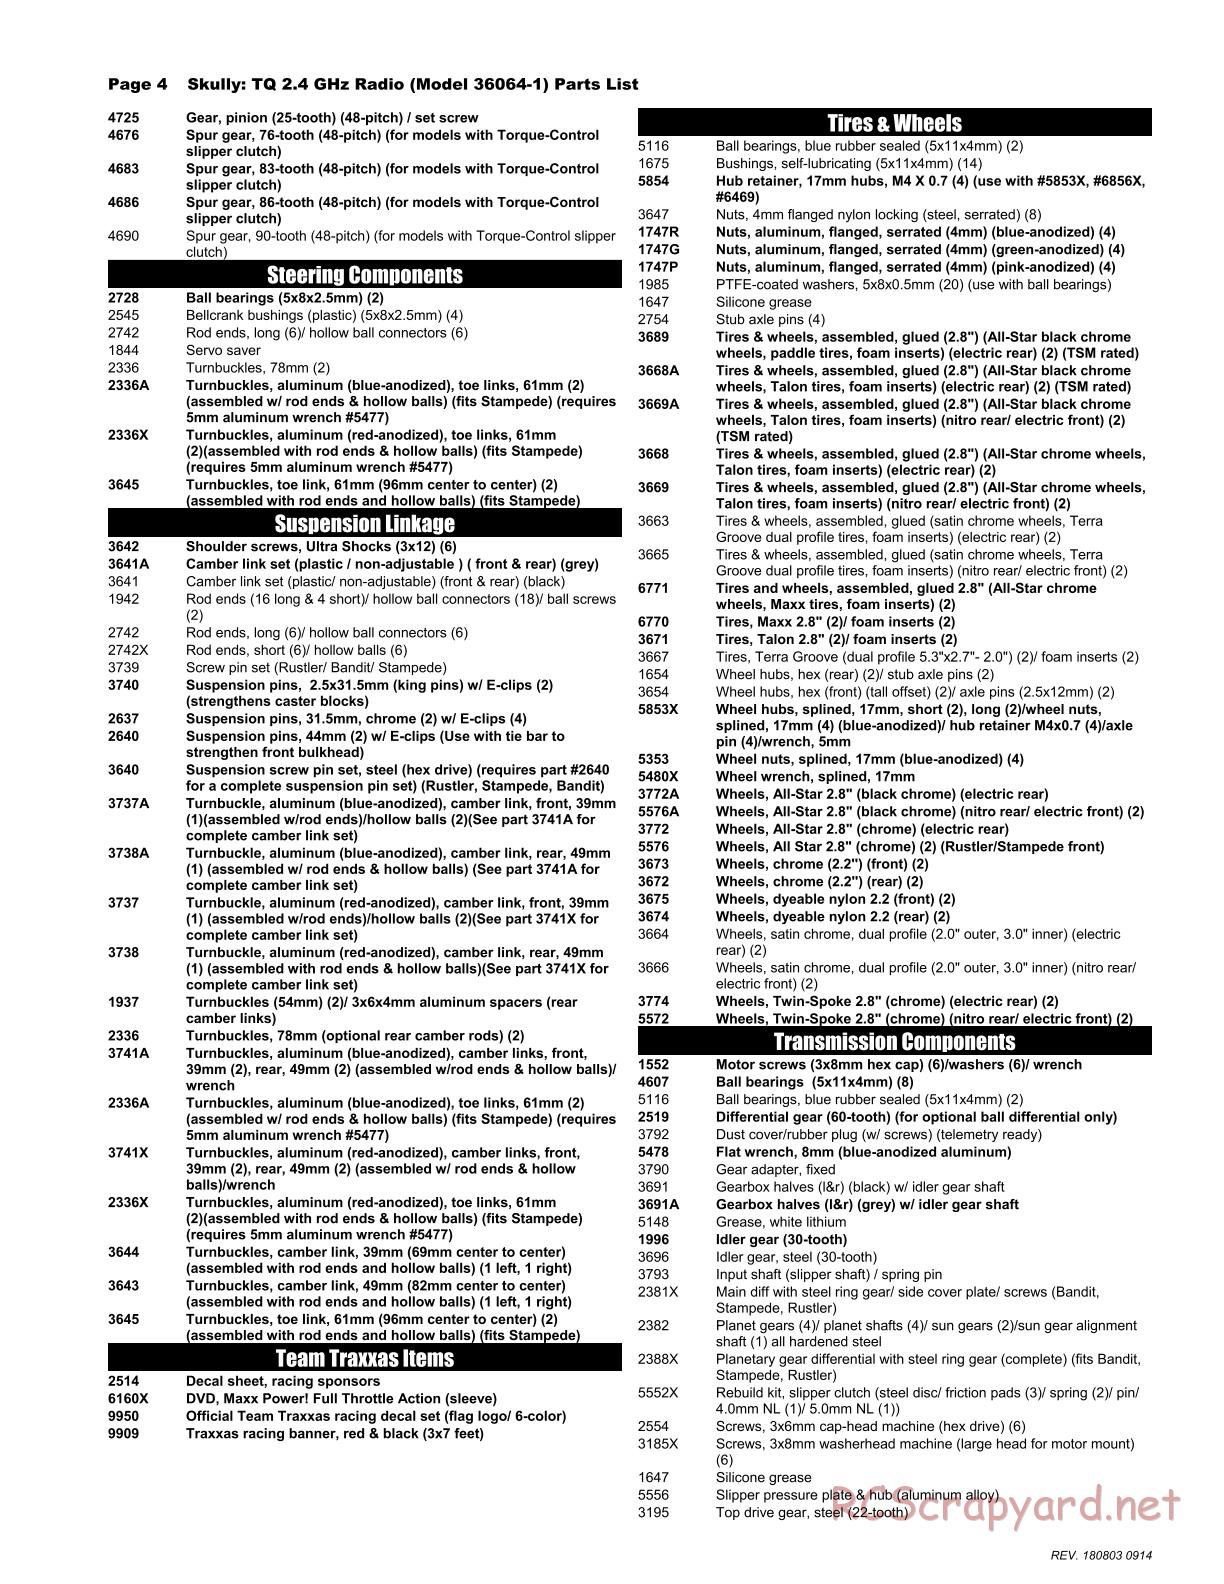 Traxxas - Skully - Parts List - Page 4